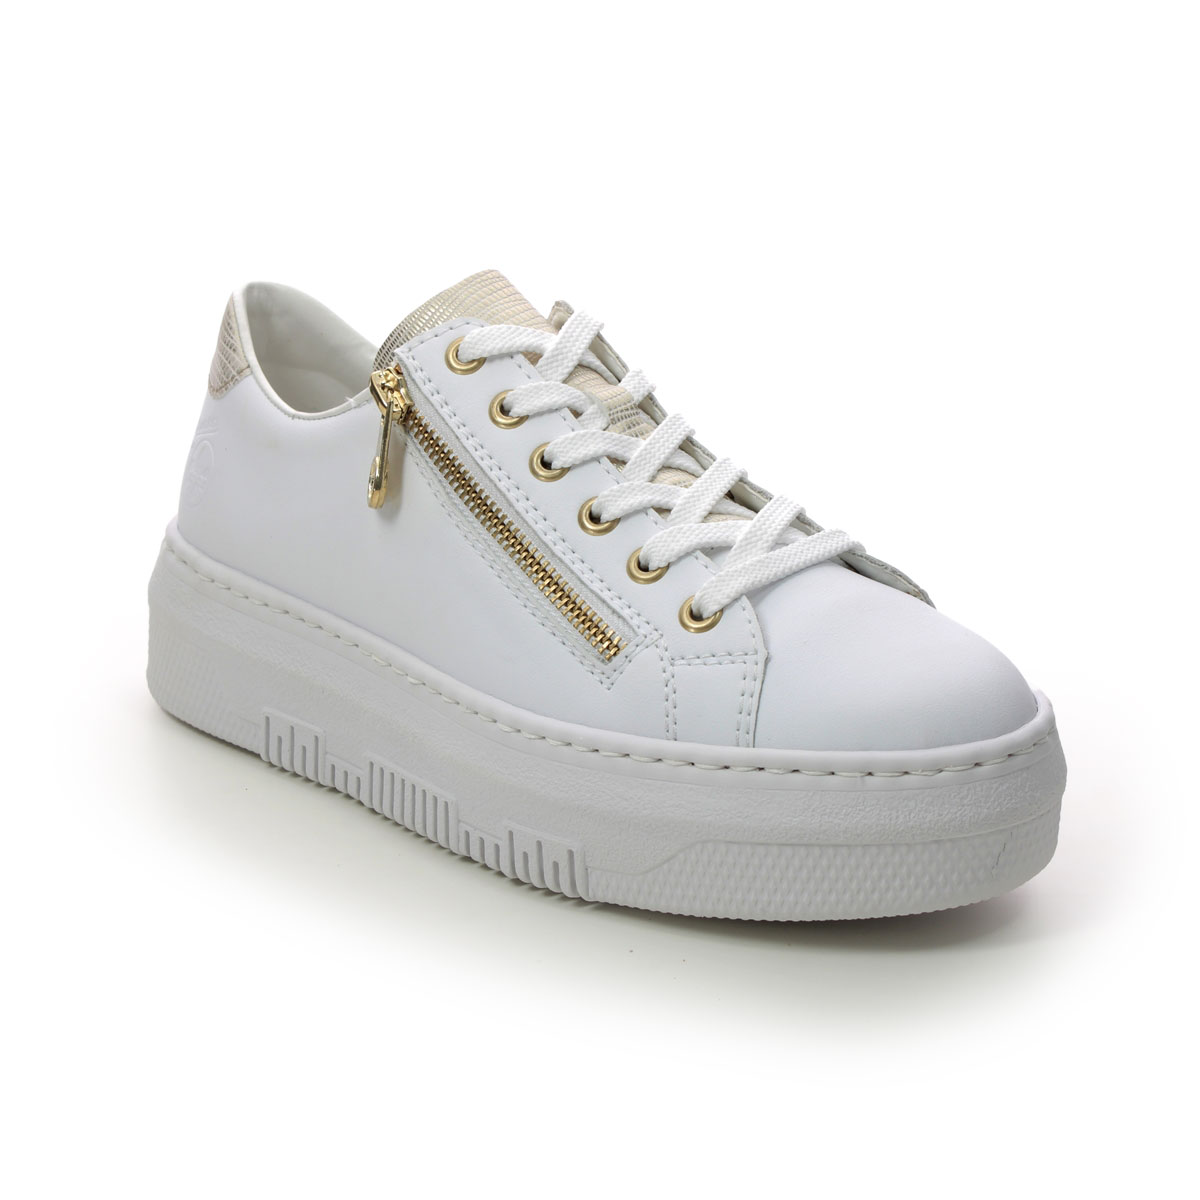 Rieker M1921-80 White Gold Womens trainers in a Plain Leather and Man-made in Size 37